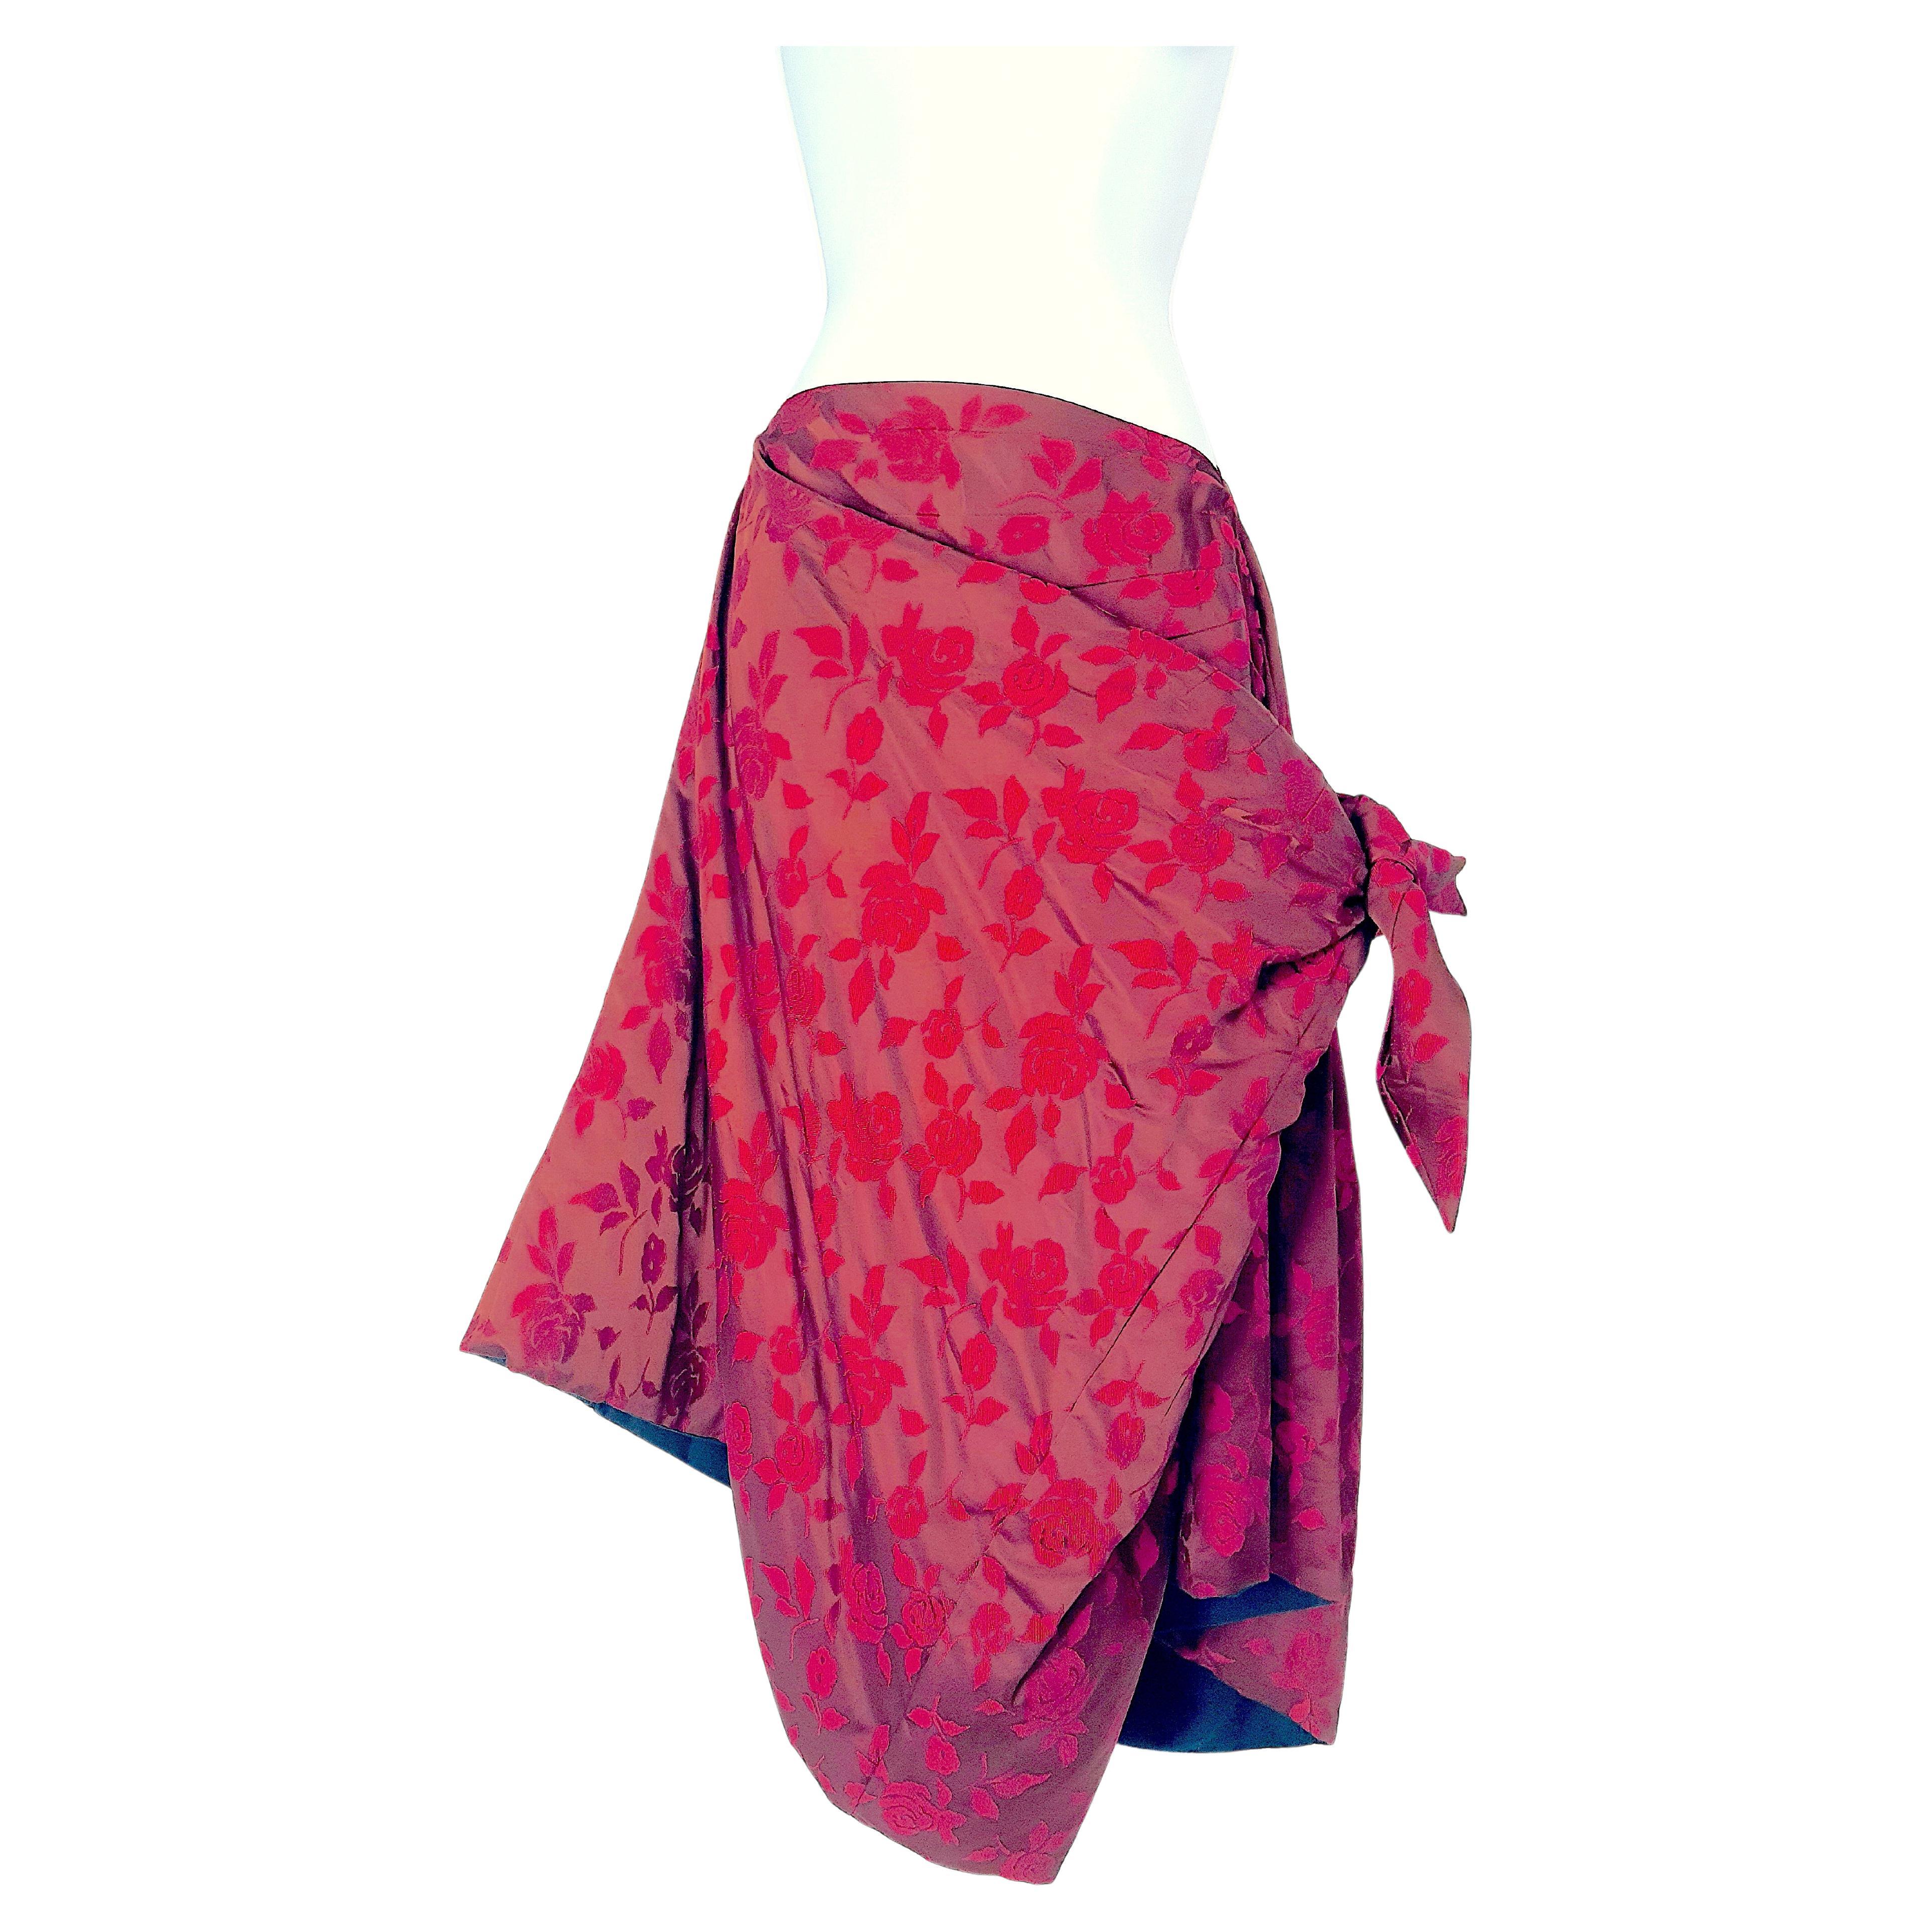 In 1996, Japanese Junya Wantanabe made this sculptural red whorled-rose jacquard evening coat-jacket cape to convert to an equally stunning asymmetrical A-line or symmetrical narrow skirt, while he was being groomed in the mid-1990s as a Comme des